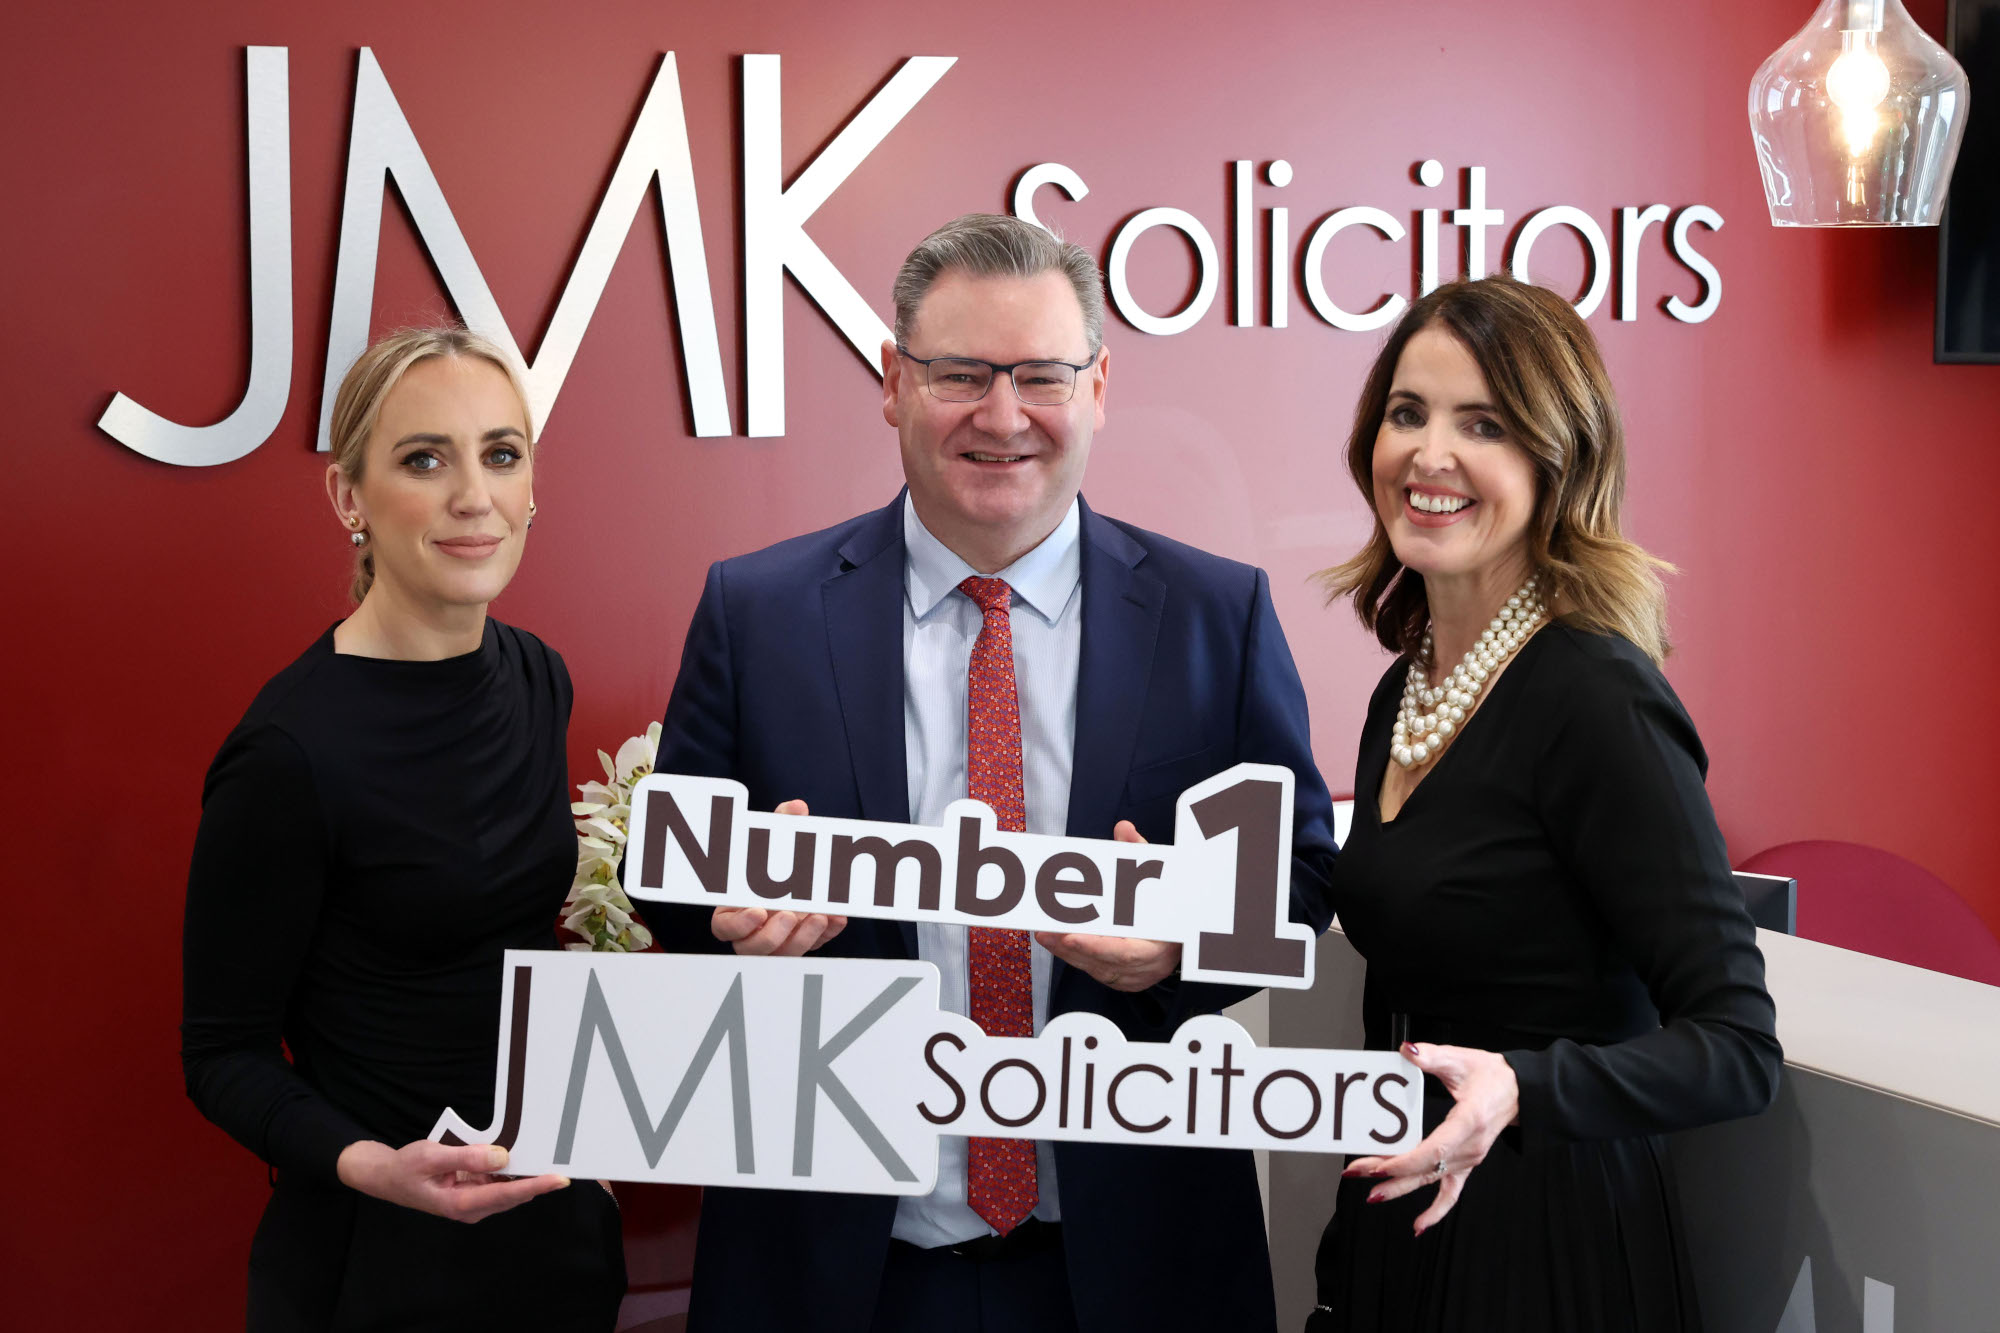 JMK Solicitors named Northern Ireland's busiest personal injury firm again